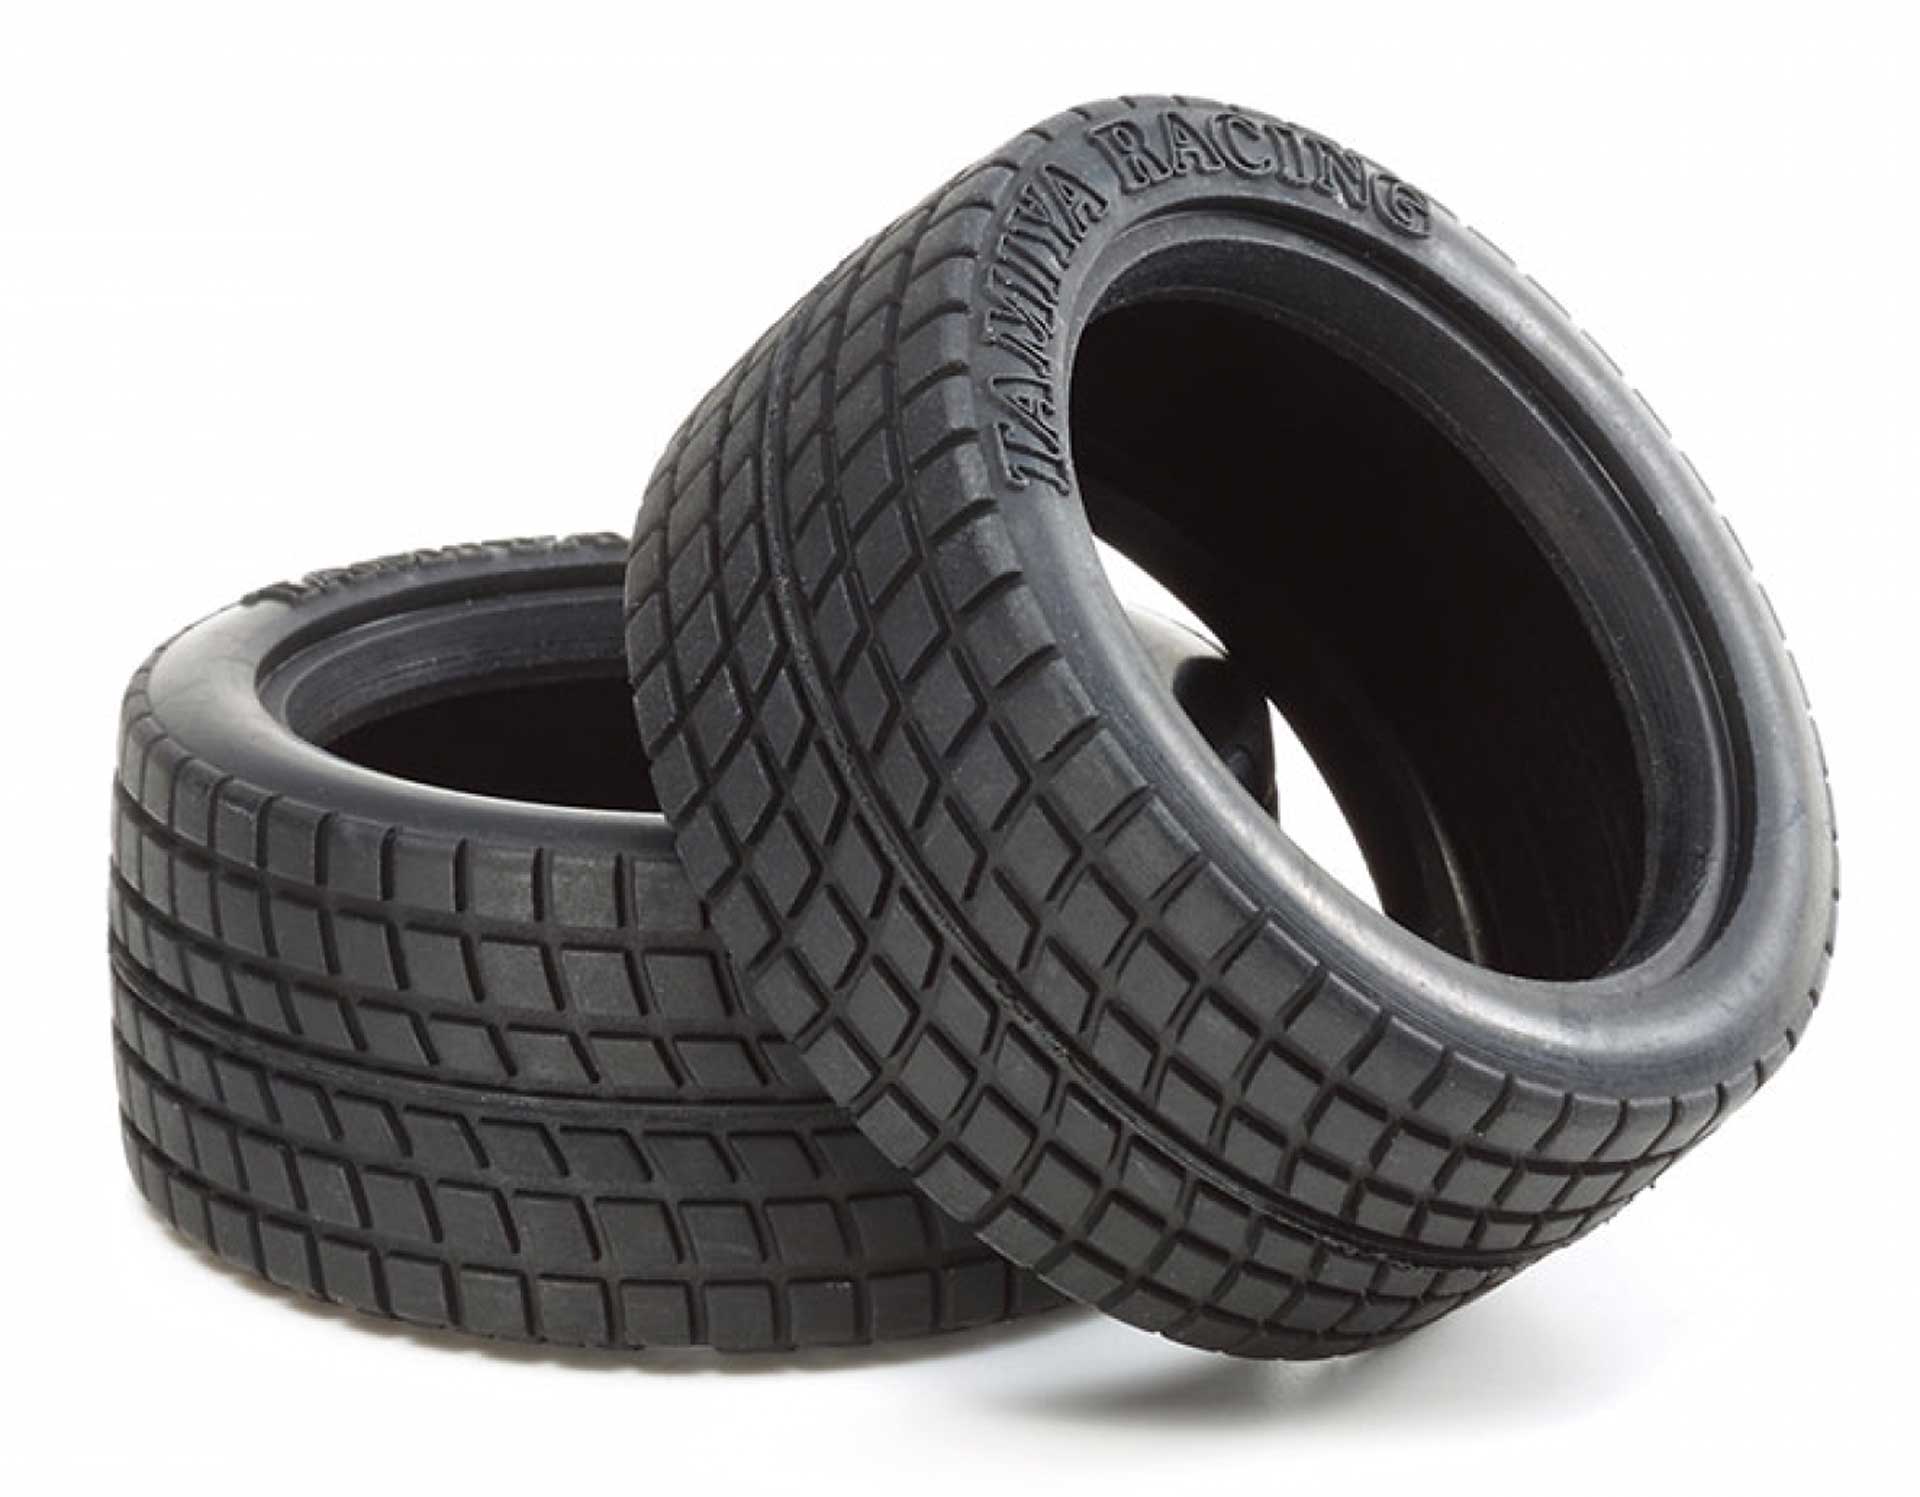 TAMIYA M-Chassis tires (2) profile 54x24mm